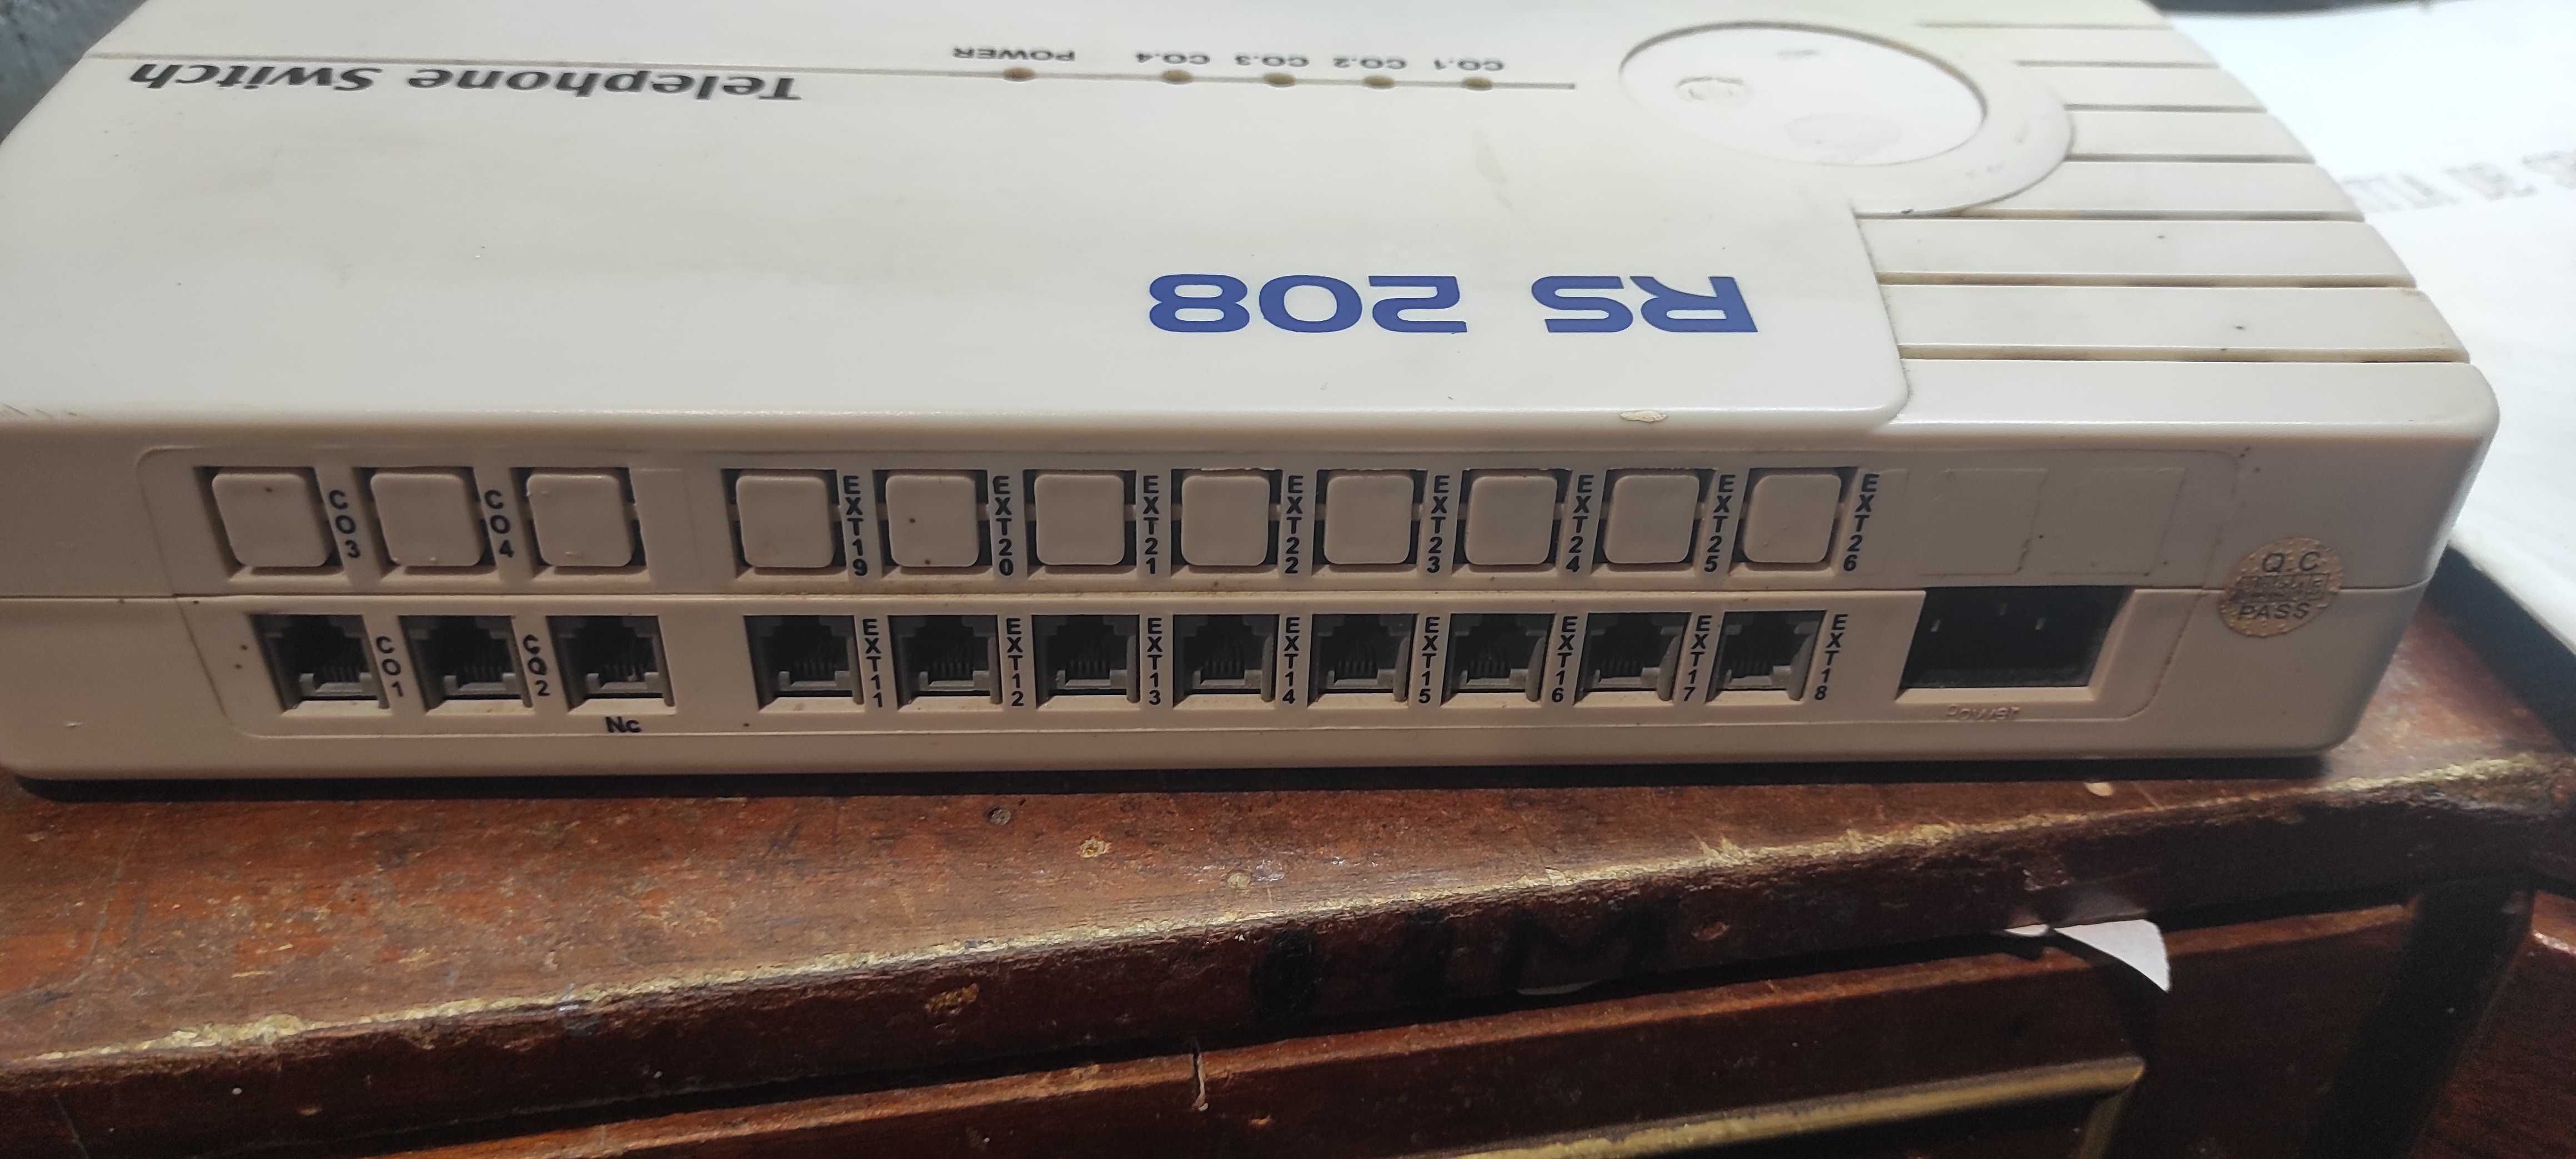 Centrala telefonica PABX RS 208